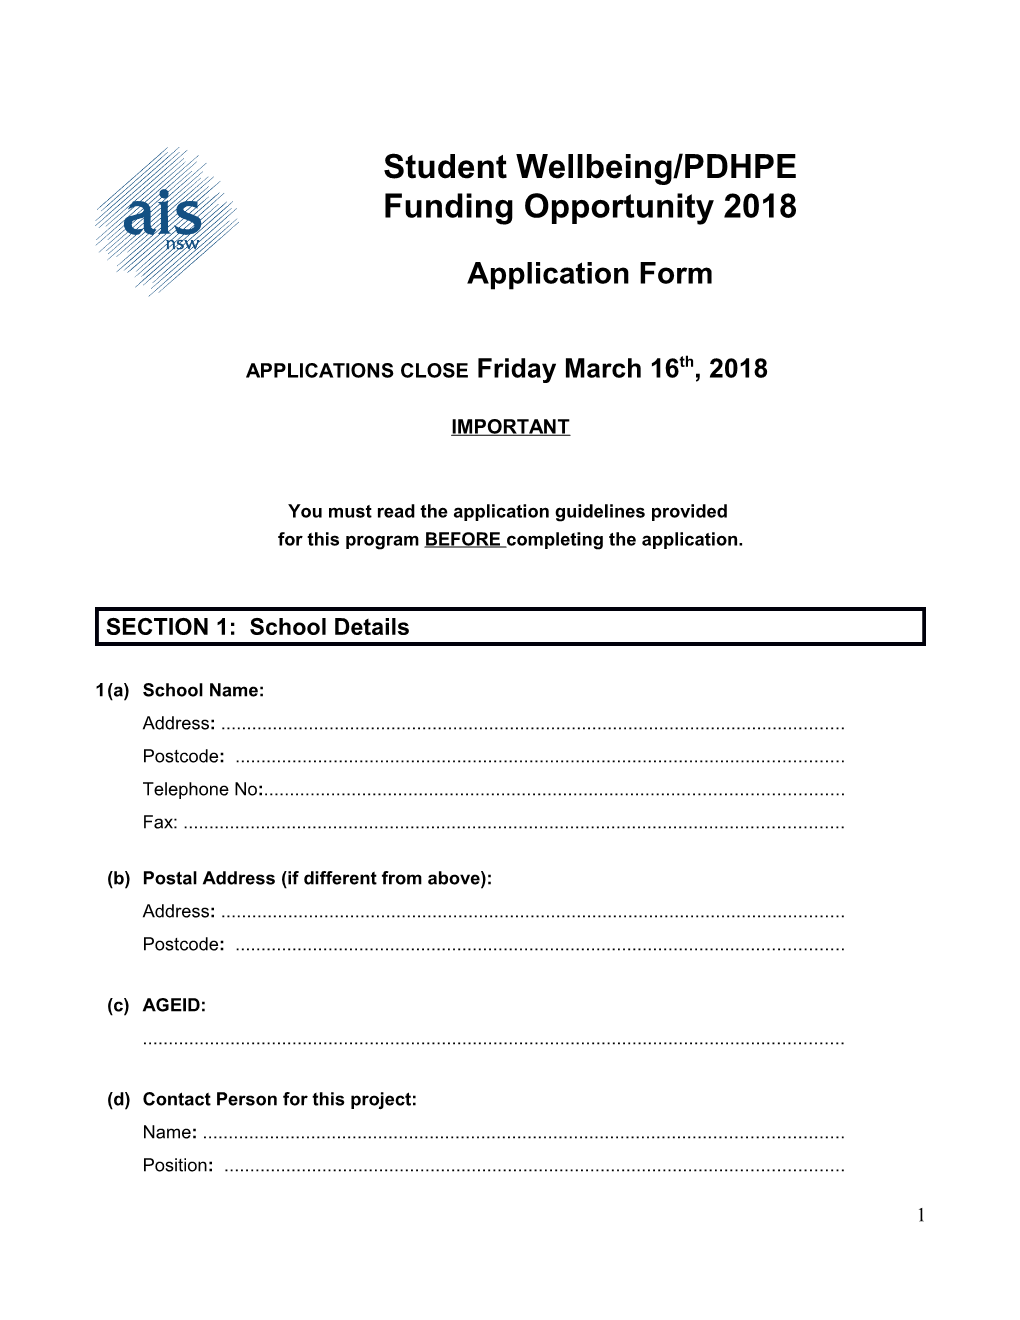 Student Wellbeing PDHPE Funding Opportunity Application 2018 FINAL